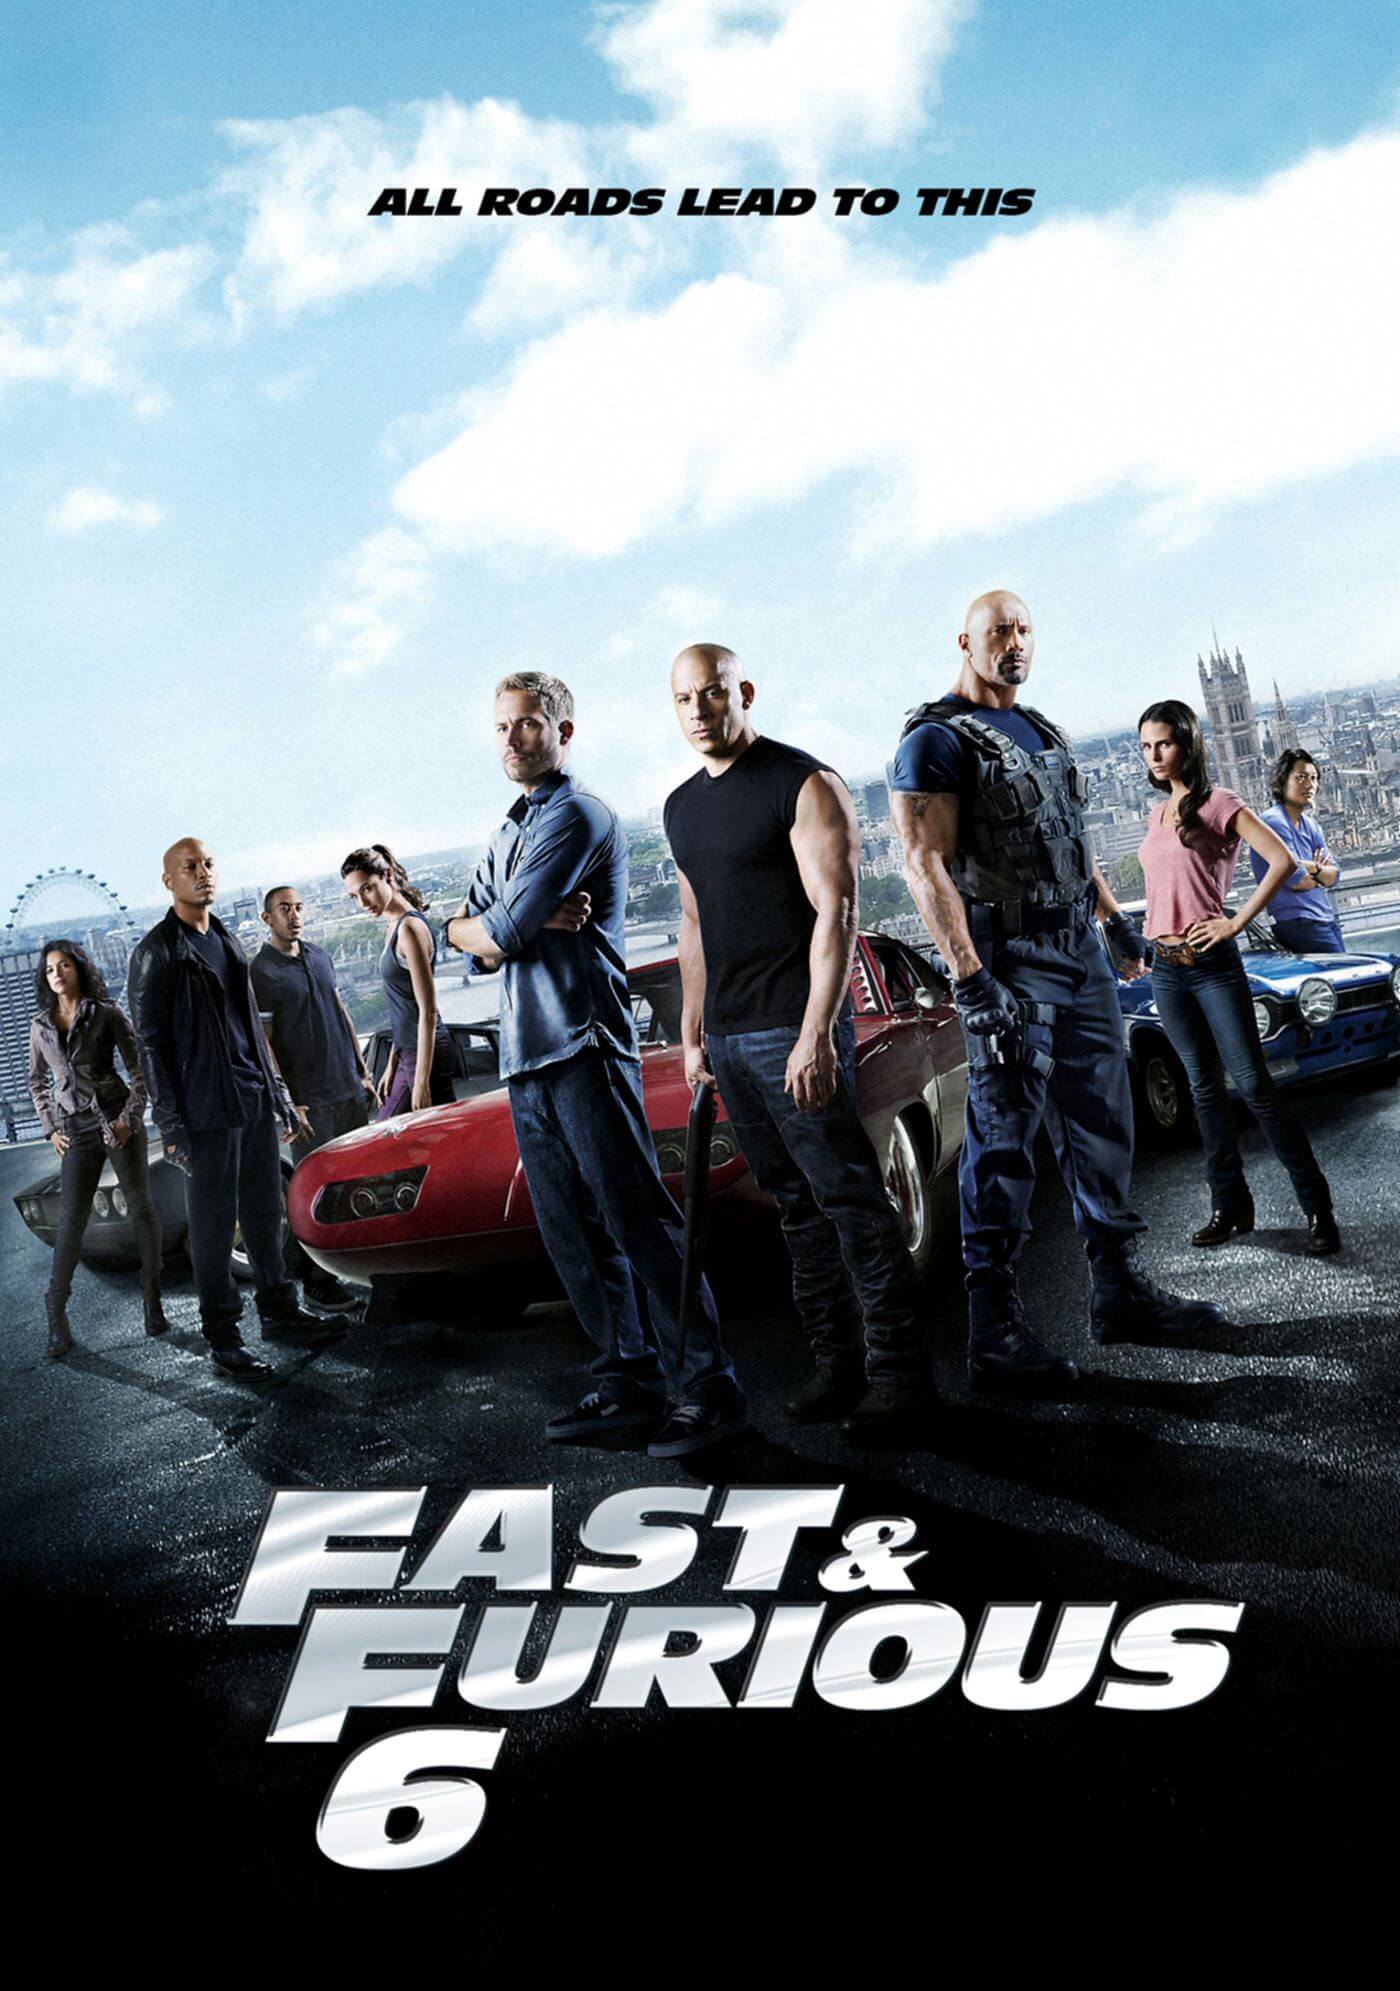 Fast & Furious 6 - Paul Walker - Vin Diesel - Dwayne Johnson - Tallenge  Hollywood Action Movie Poster - Canvas Prints by Brian O'Conner | Buy  Posters, Frames, Canvas & Digital